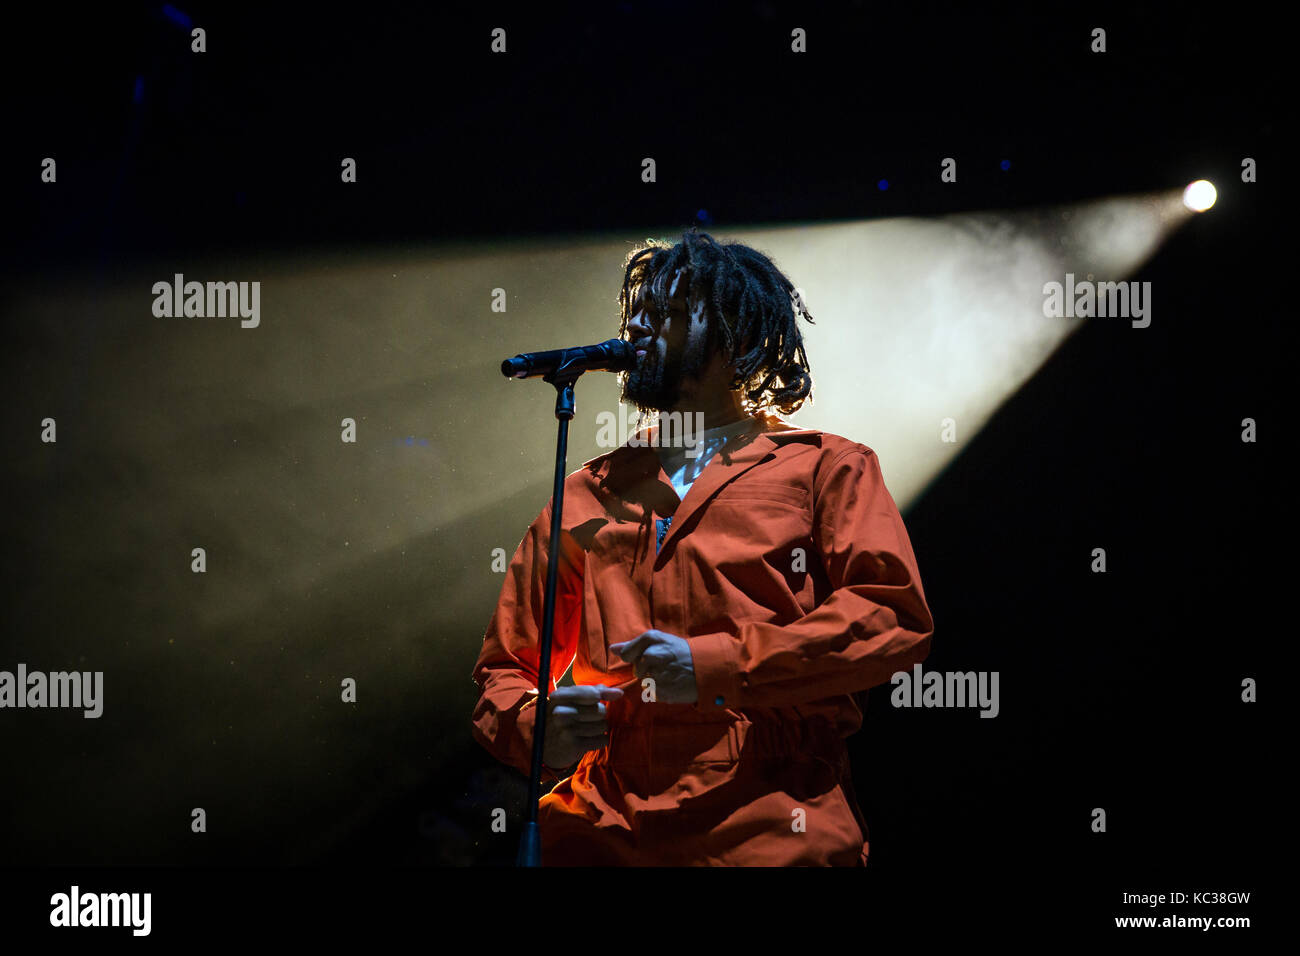 Norway, Oslo - September 30, 2017. The American singer, rapper and record producer J. Cole performs a live concert at Oslo Spektrum. (Photo credit: Gonzales Photo / Tord Litleskare). Stock Photo